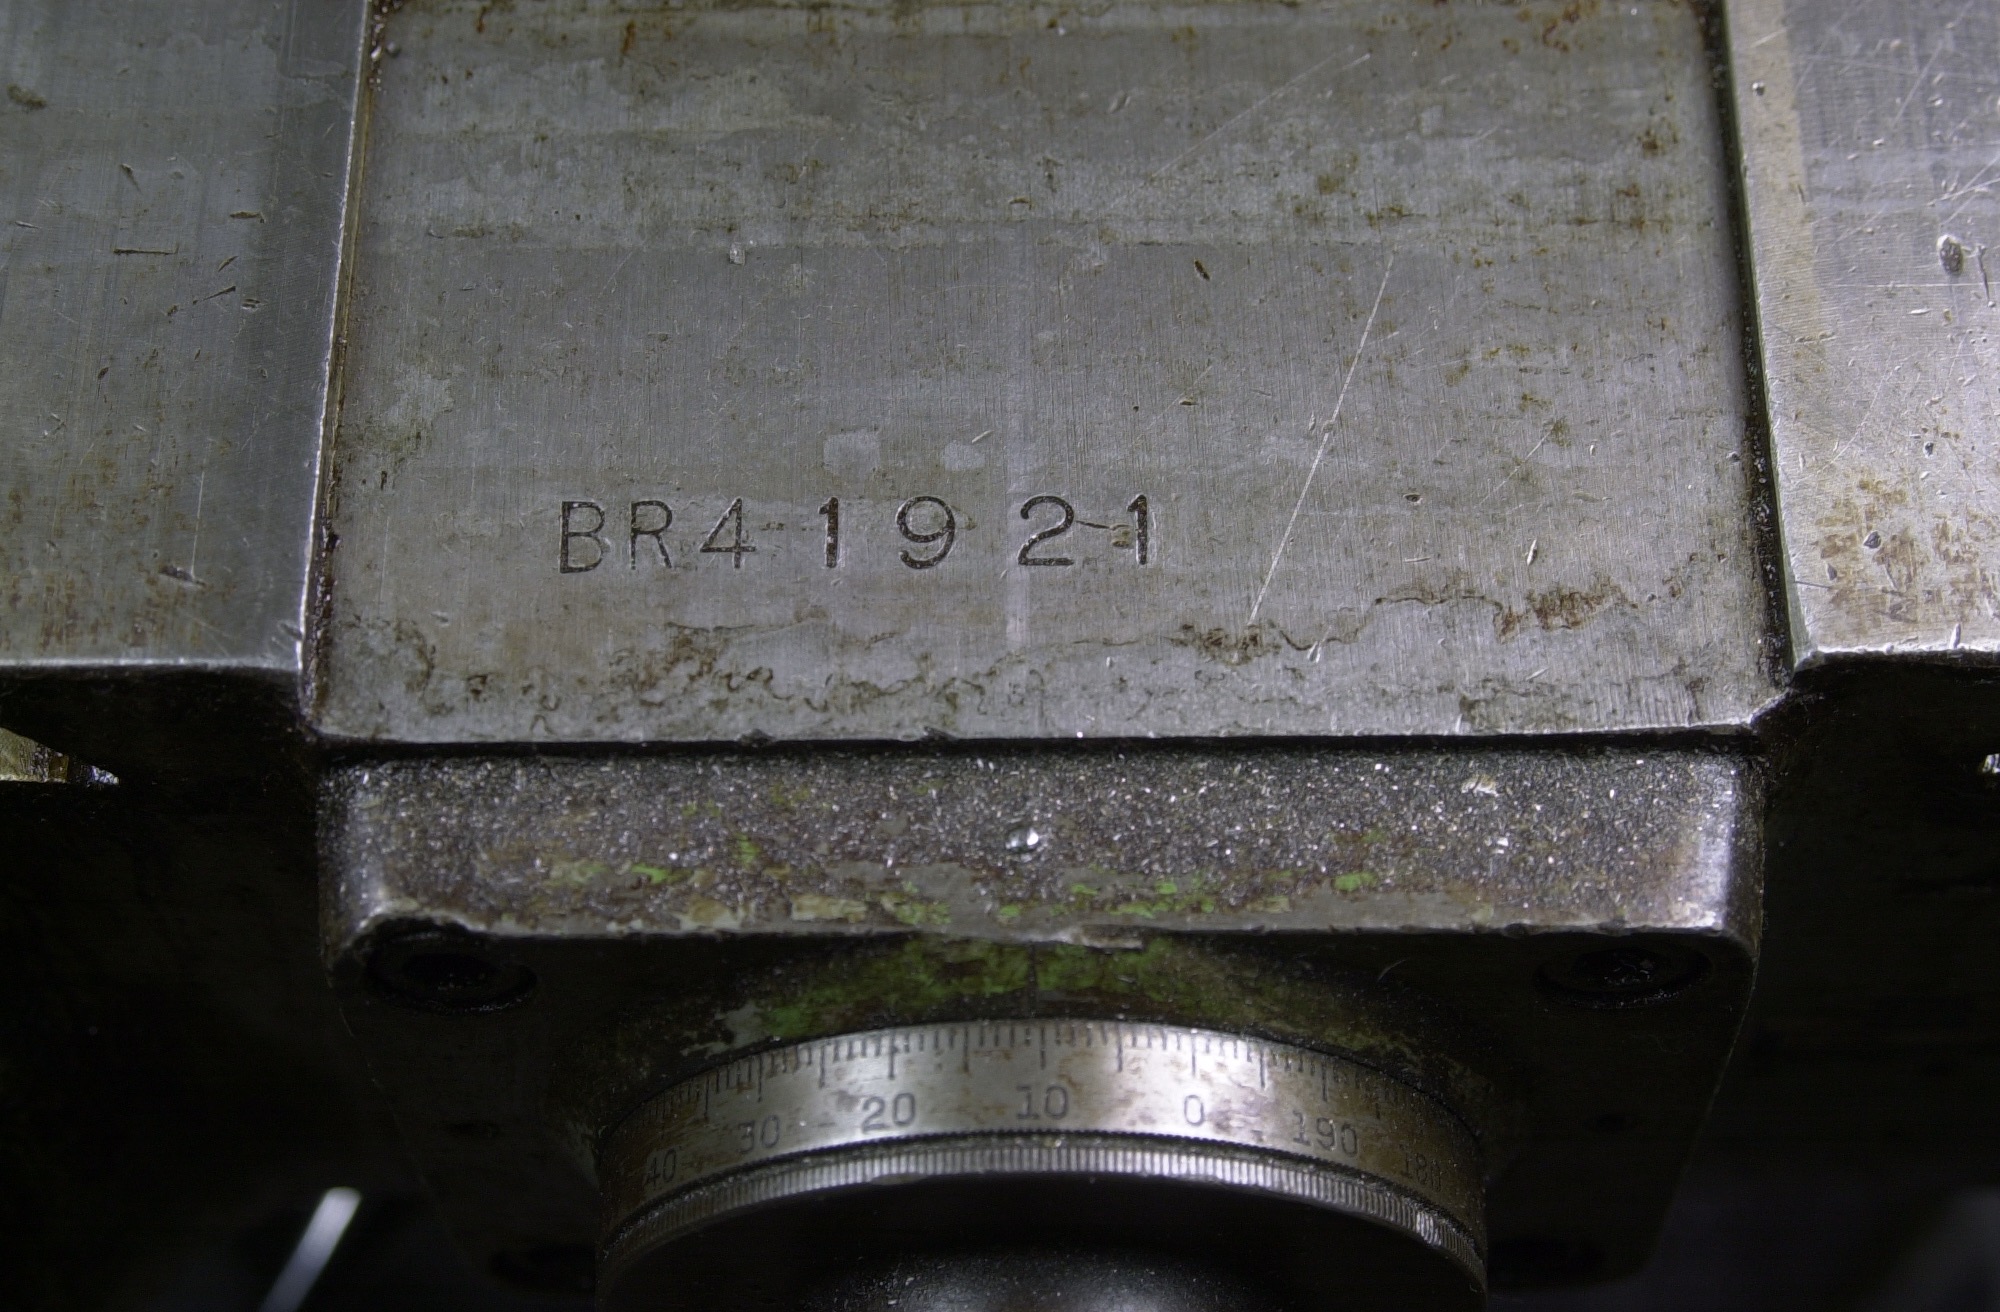 BR41921 is the serial number of my trusty Bridgeport milling machine which corresponds to a manufacturing date of 1958.